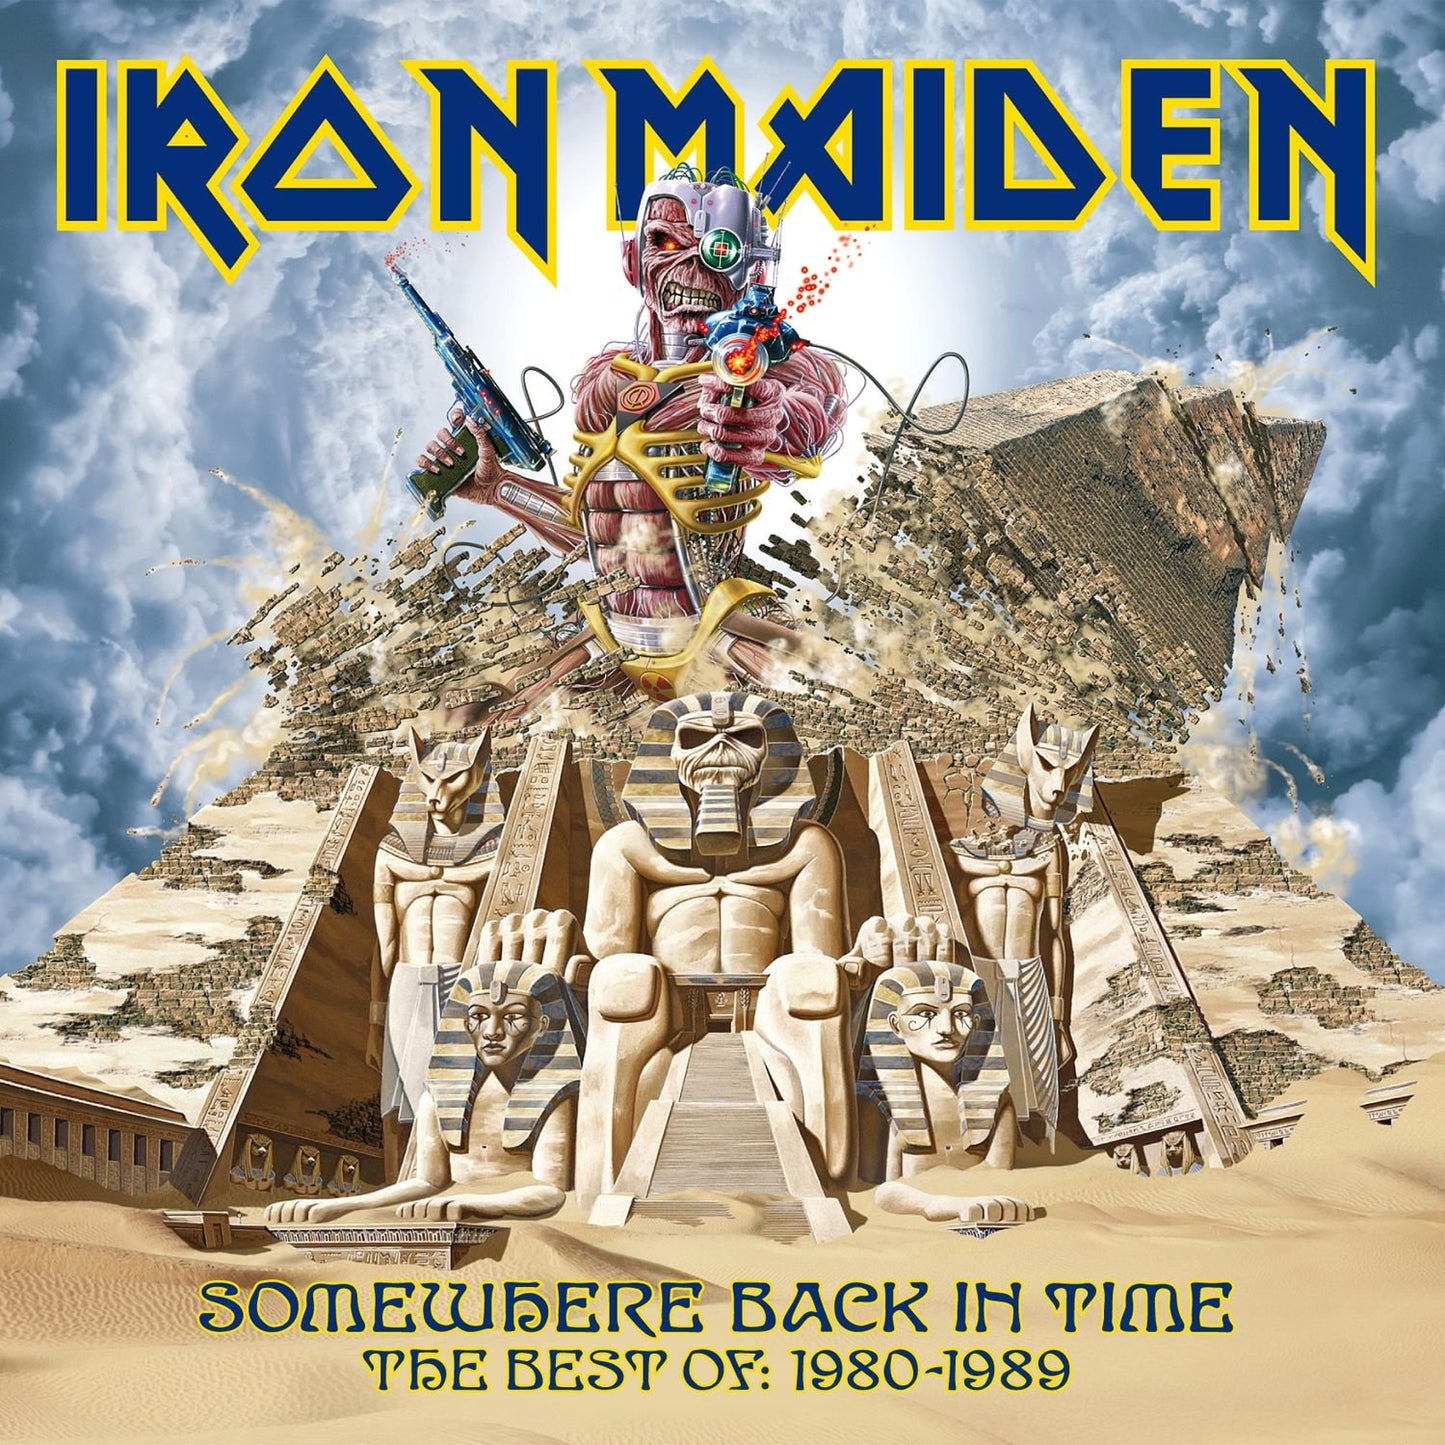 IRON MAIDEN - SOMEWHERE BACK IN TIME - BEST OF 198-1989